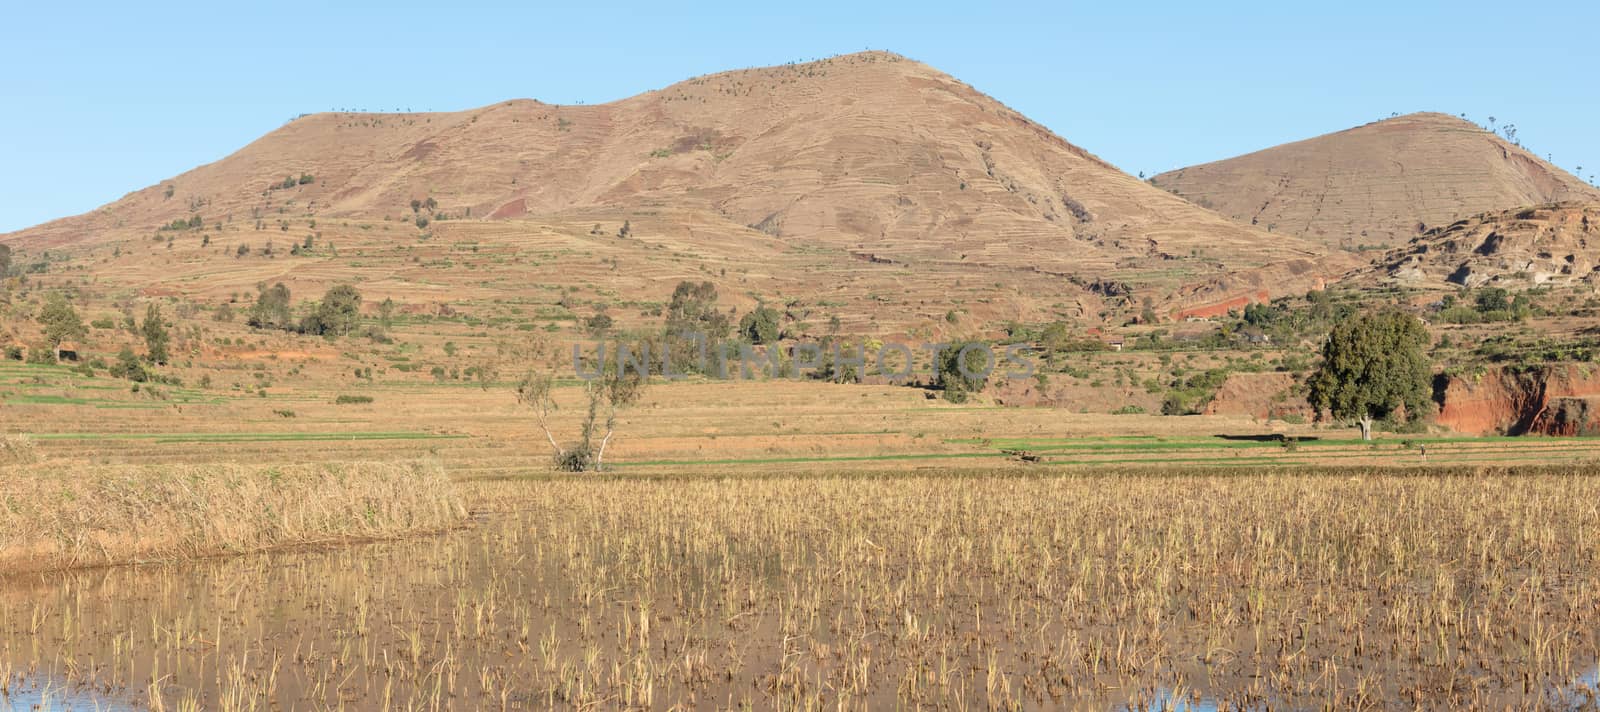 Agricultural fields in Madagascar, food for the local people